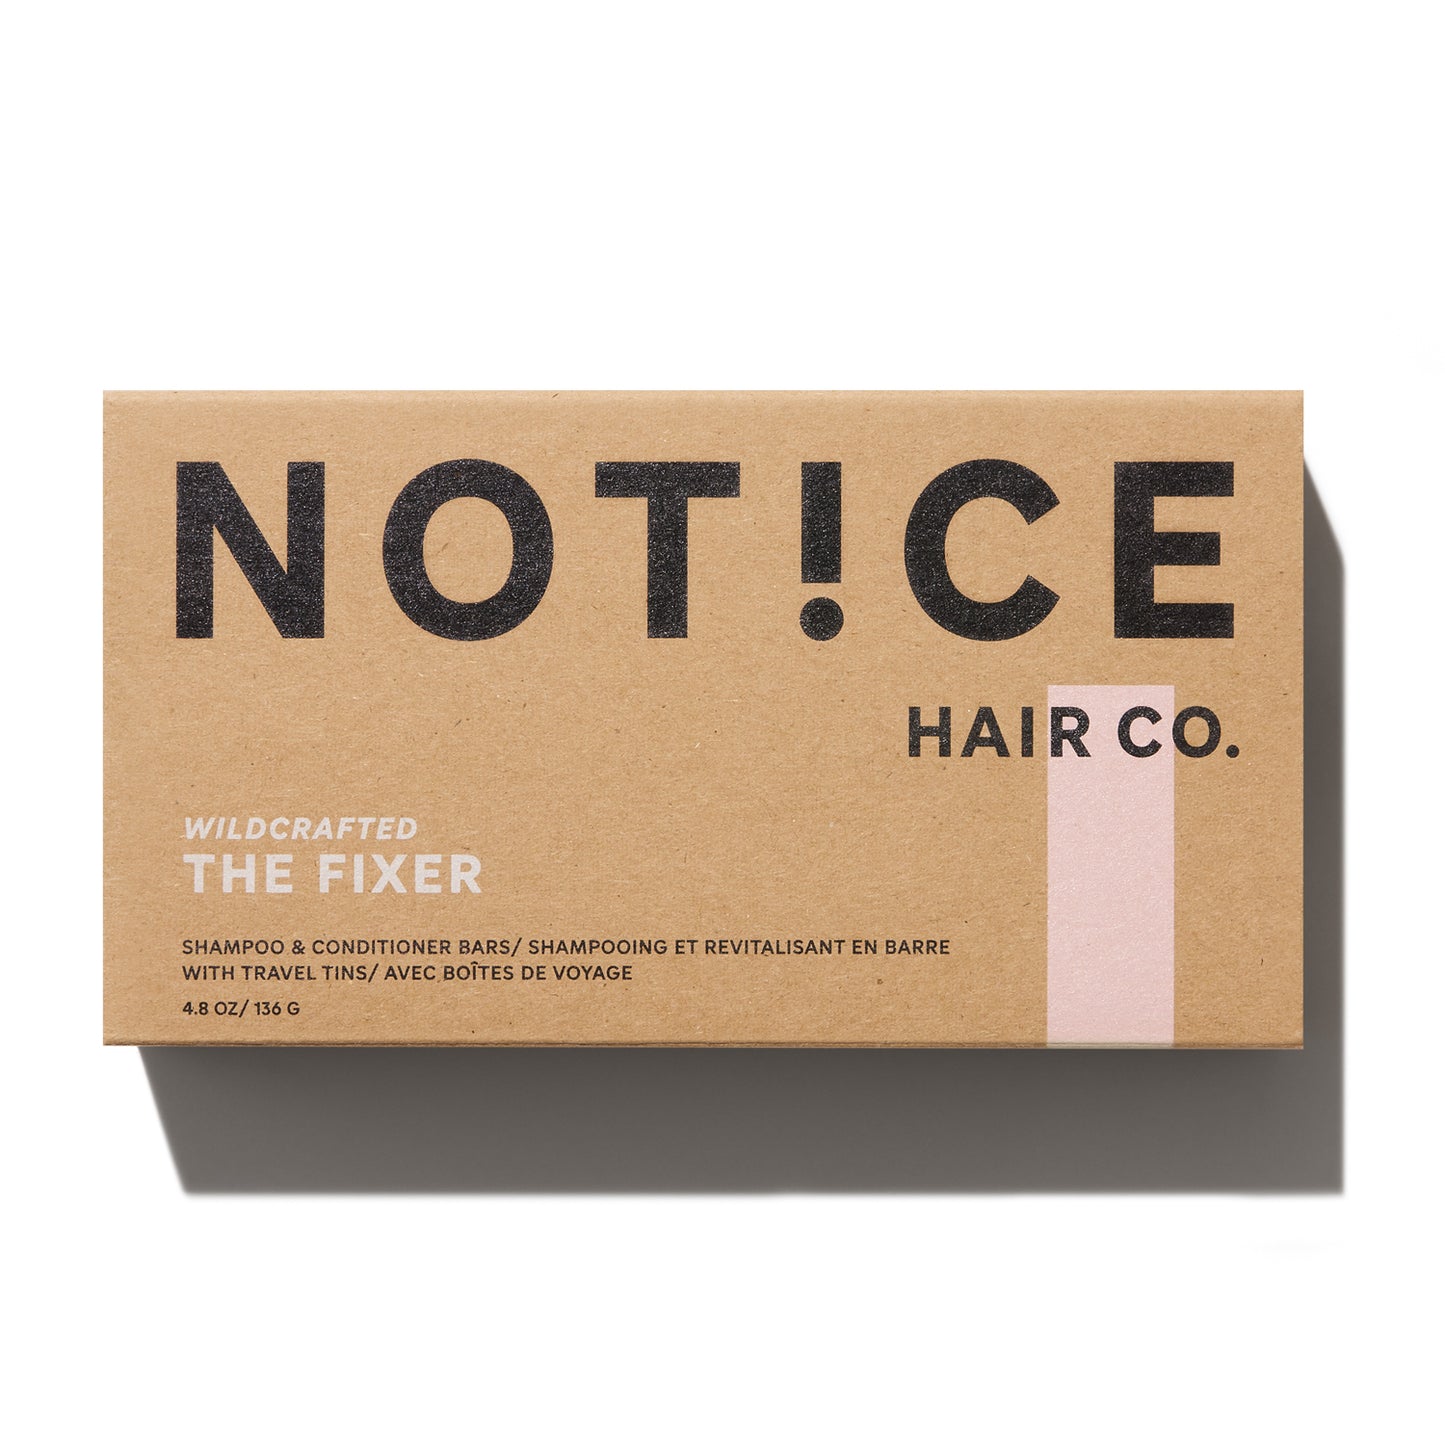 Notice Shampoo & Conditioner Bars (formerly Unwrapped Life)